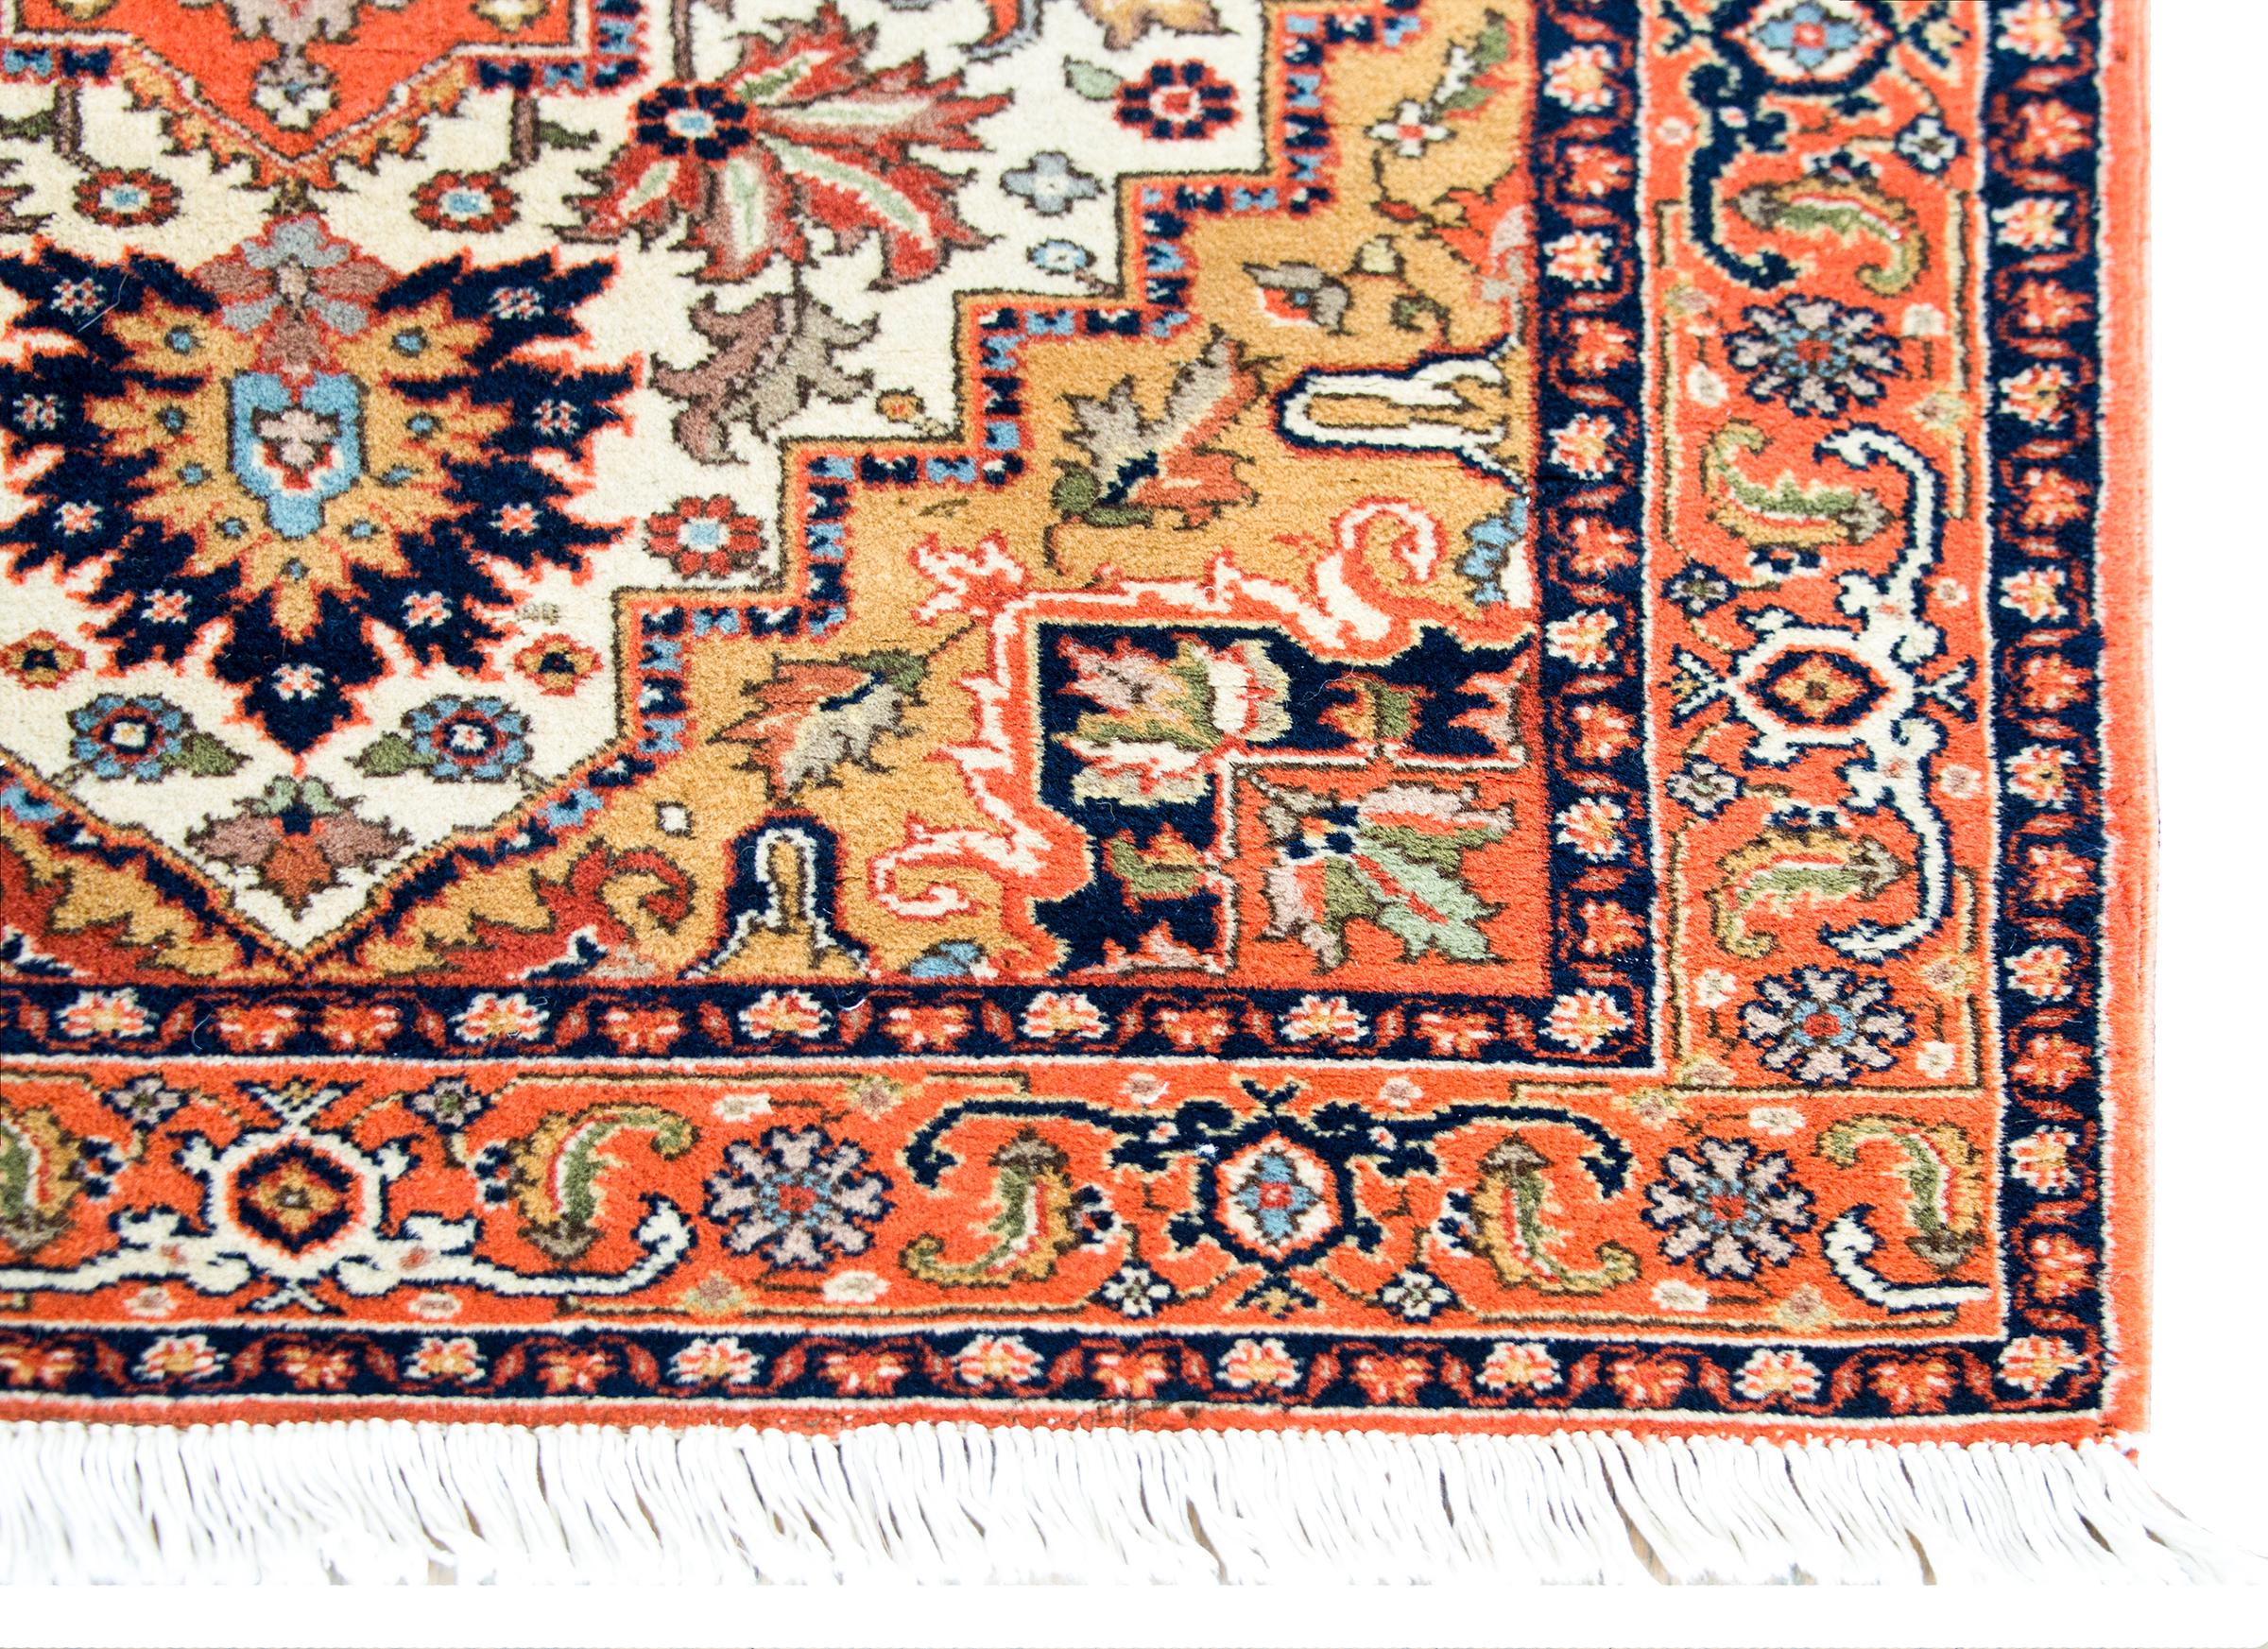 A wonderful mid-20th century Persian Ardabil rug with a large central floral medallion living amidst even more large flowers and leaves, surrounded by a complex border with stylized scrolling vines and flowers, and all woven in orange, gold, light